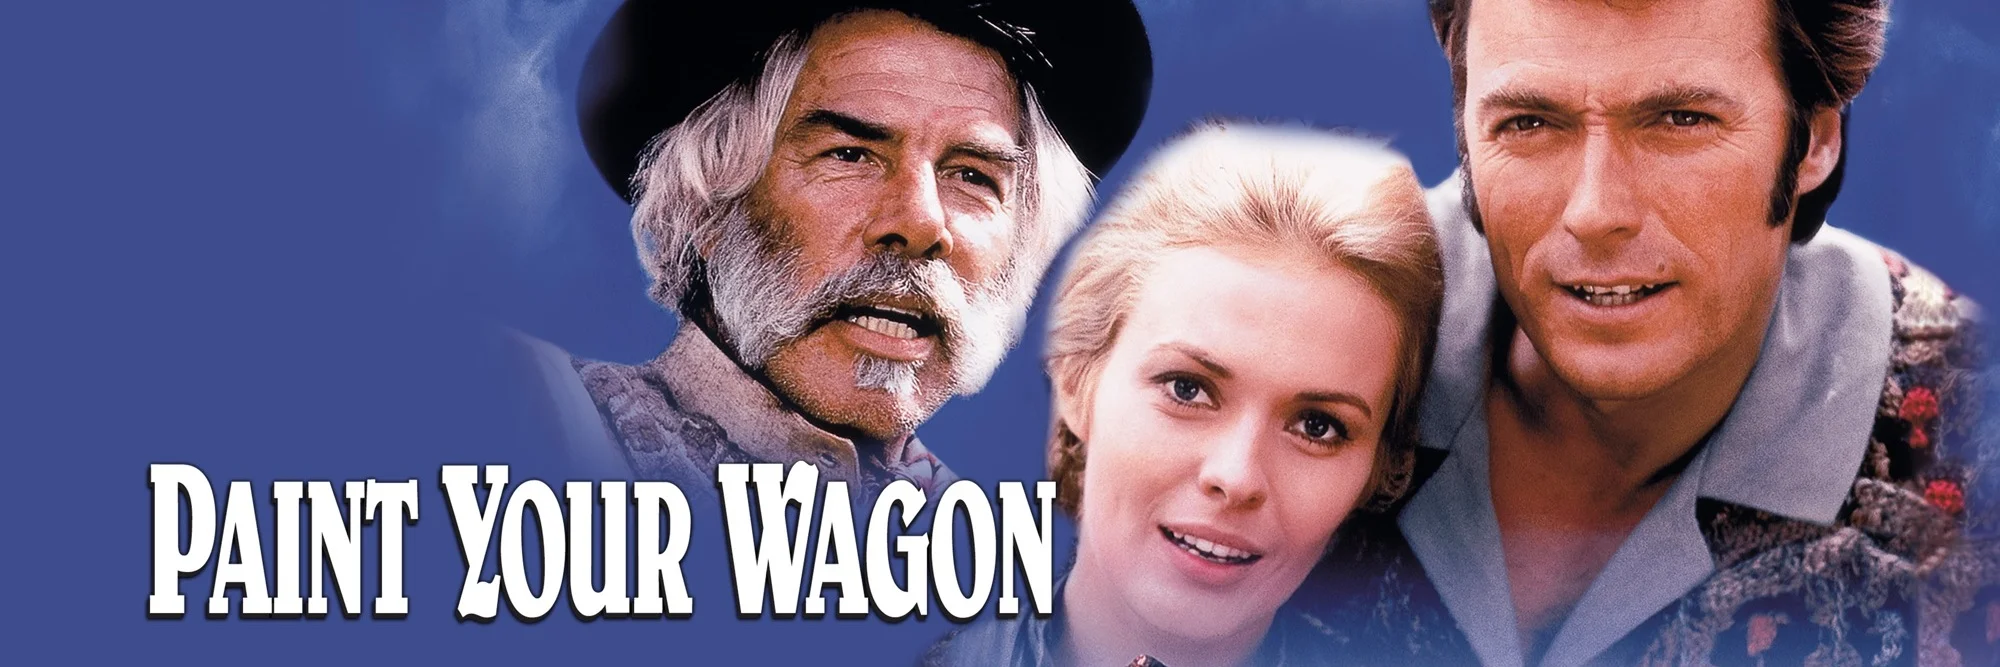 Paint Your Wagon 4K 1969 big poster